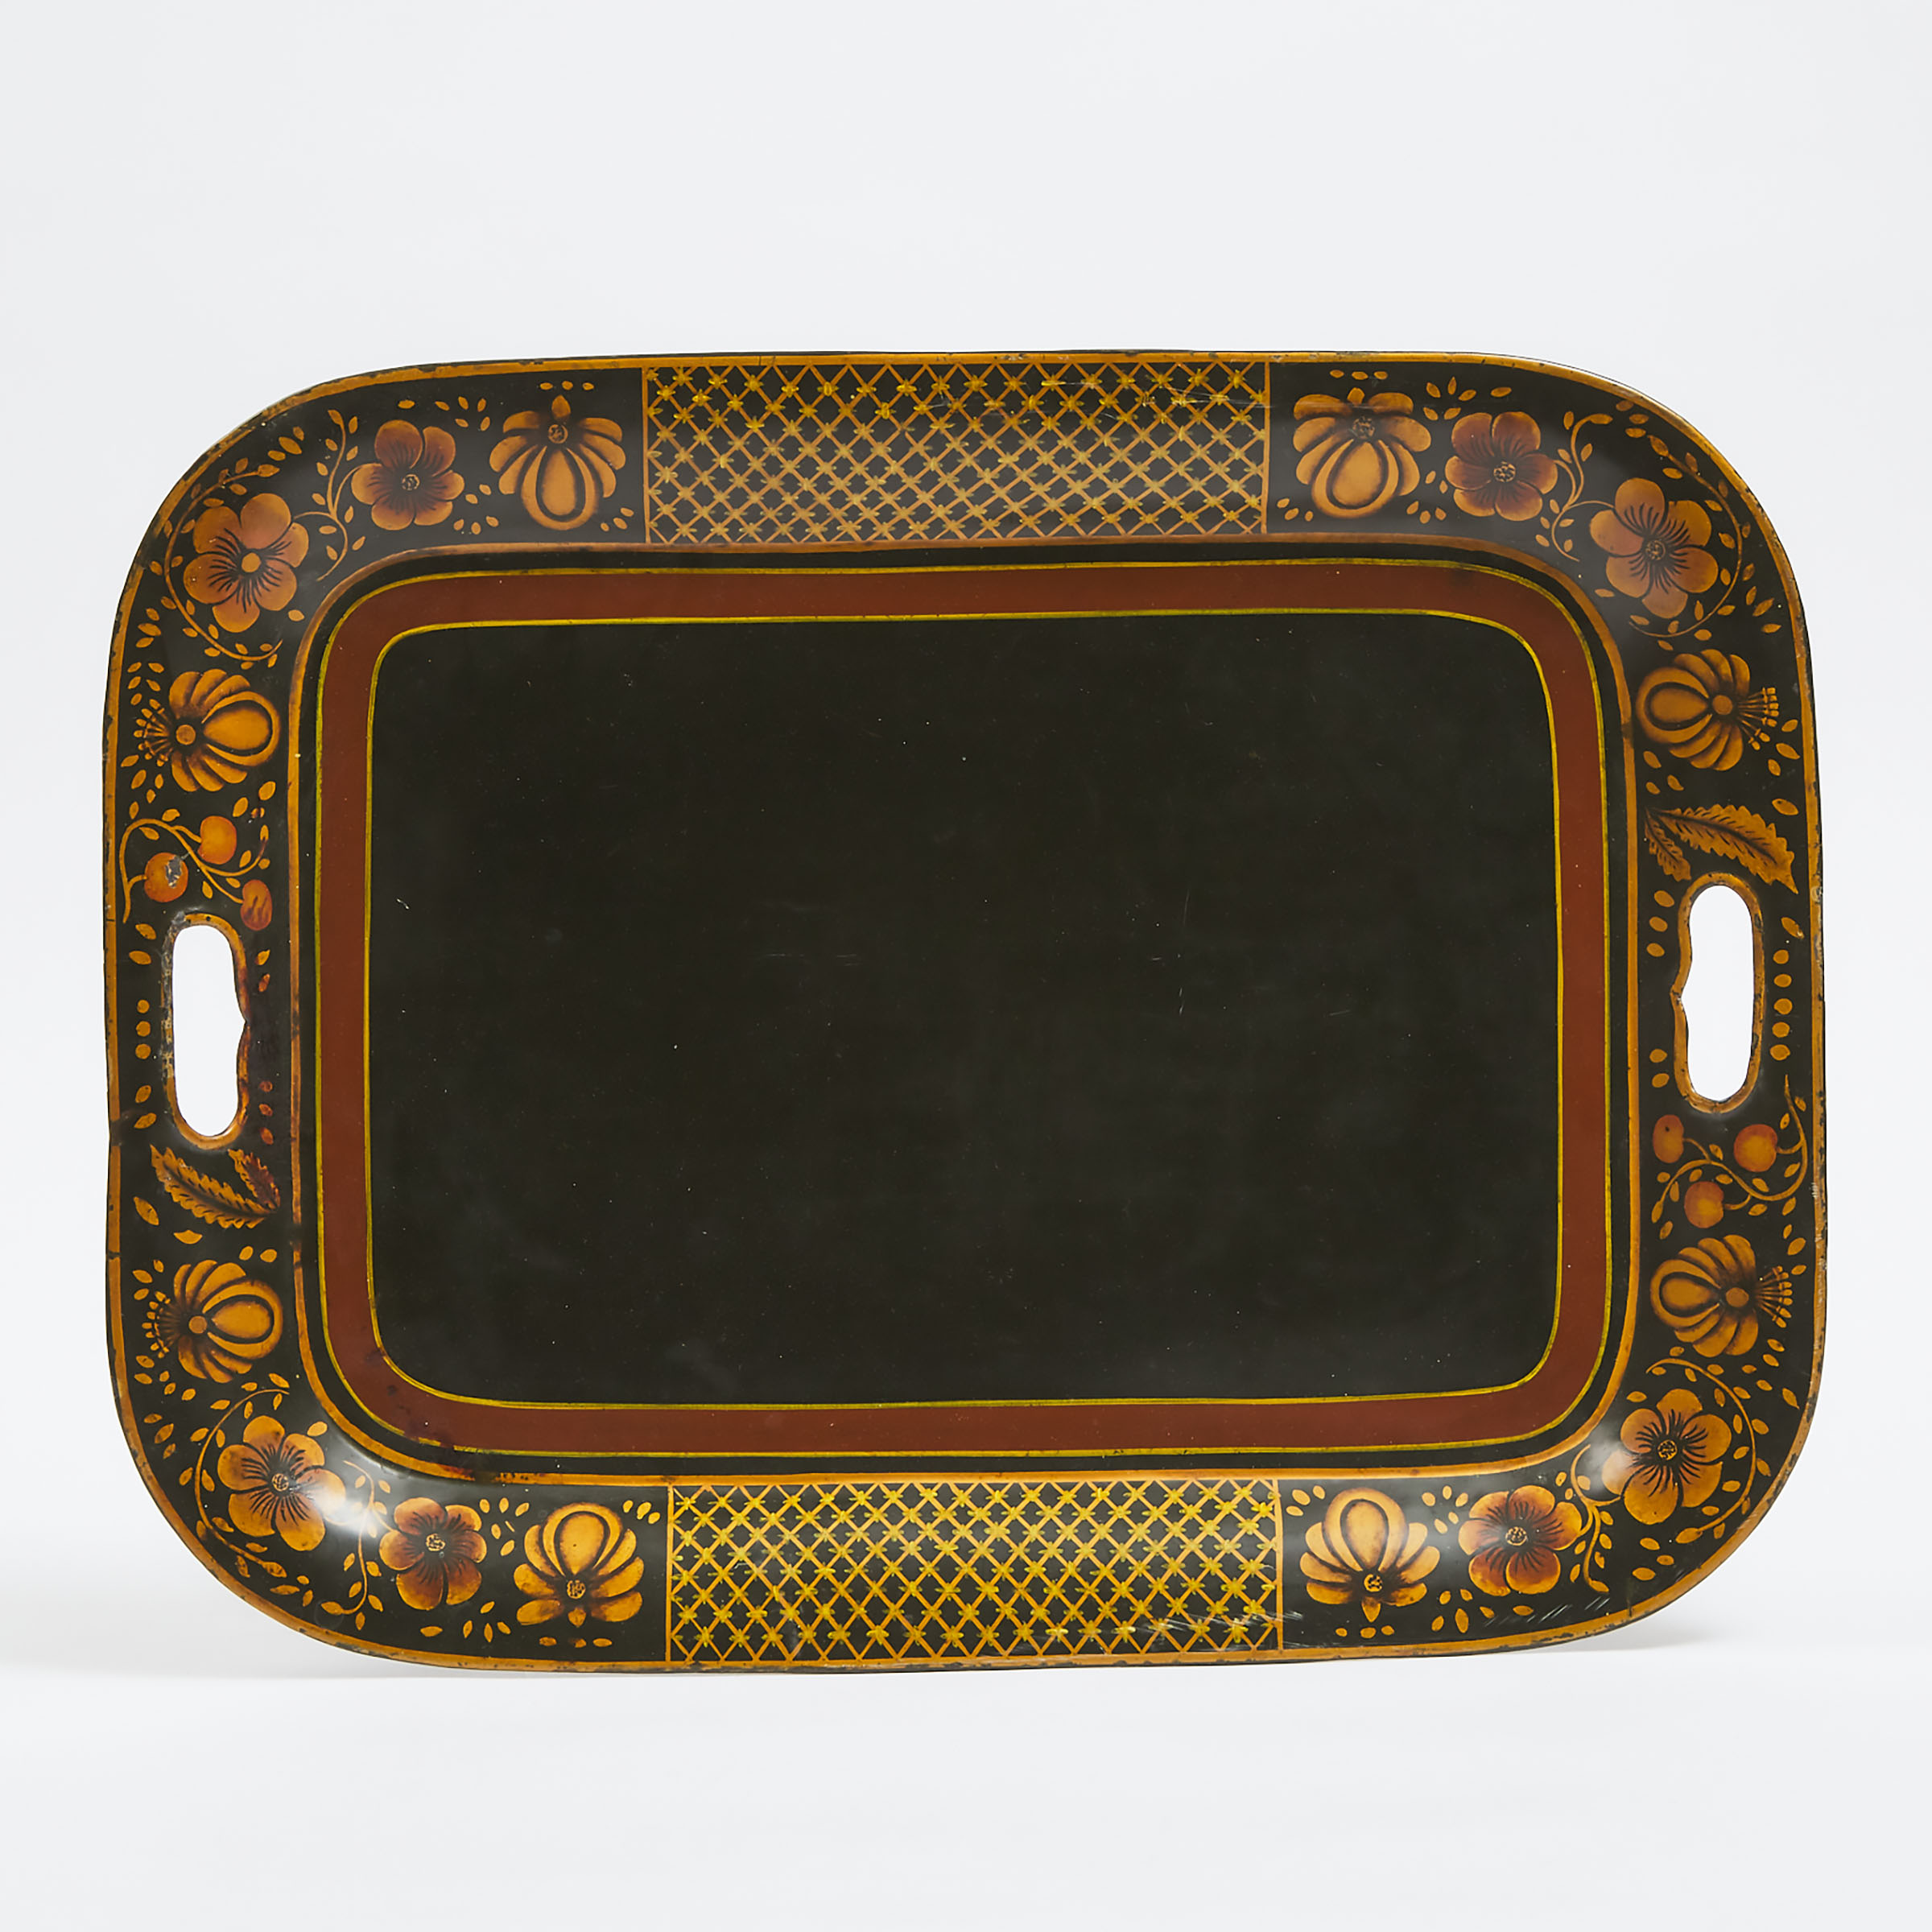 French Tole Tea Tray, 19th/early 20th century